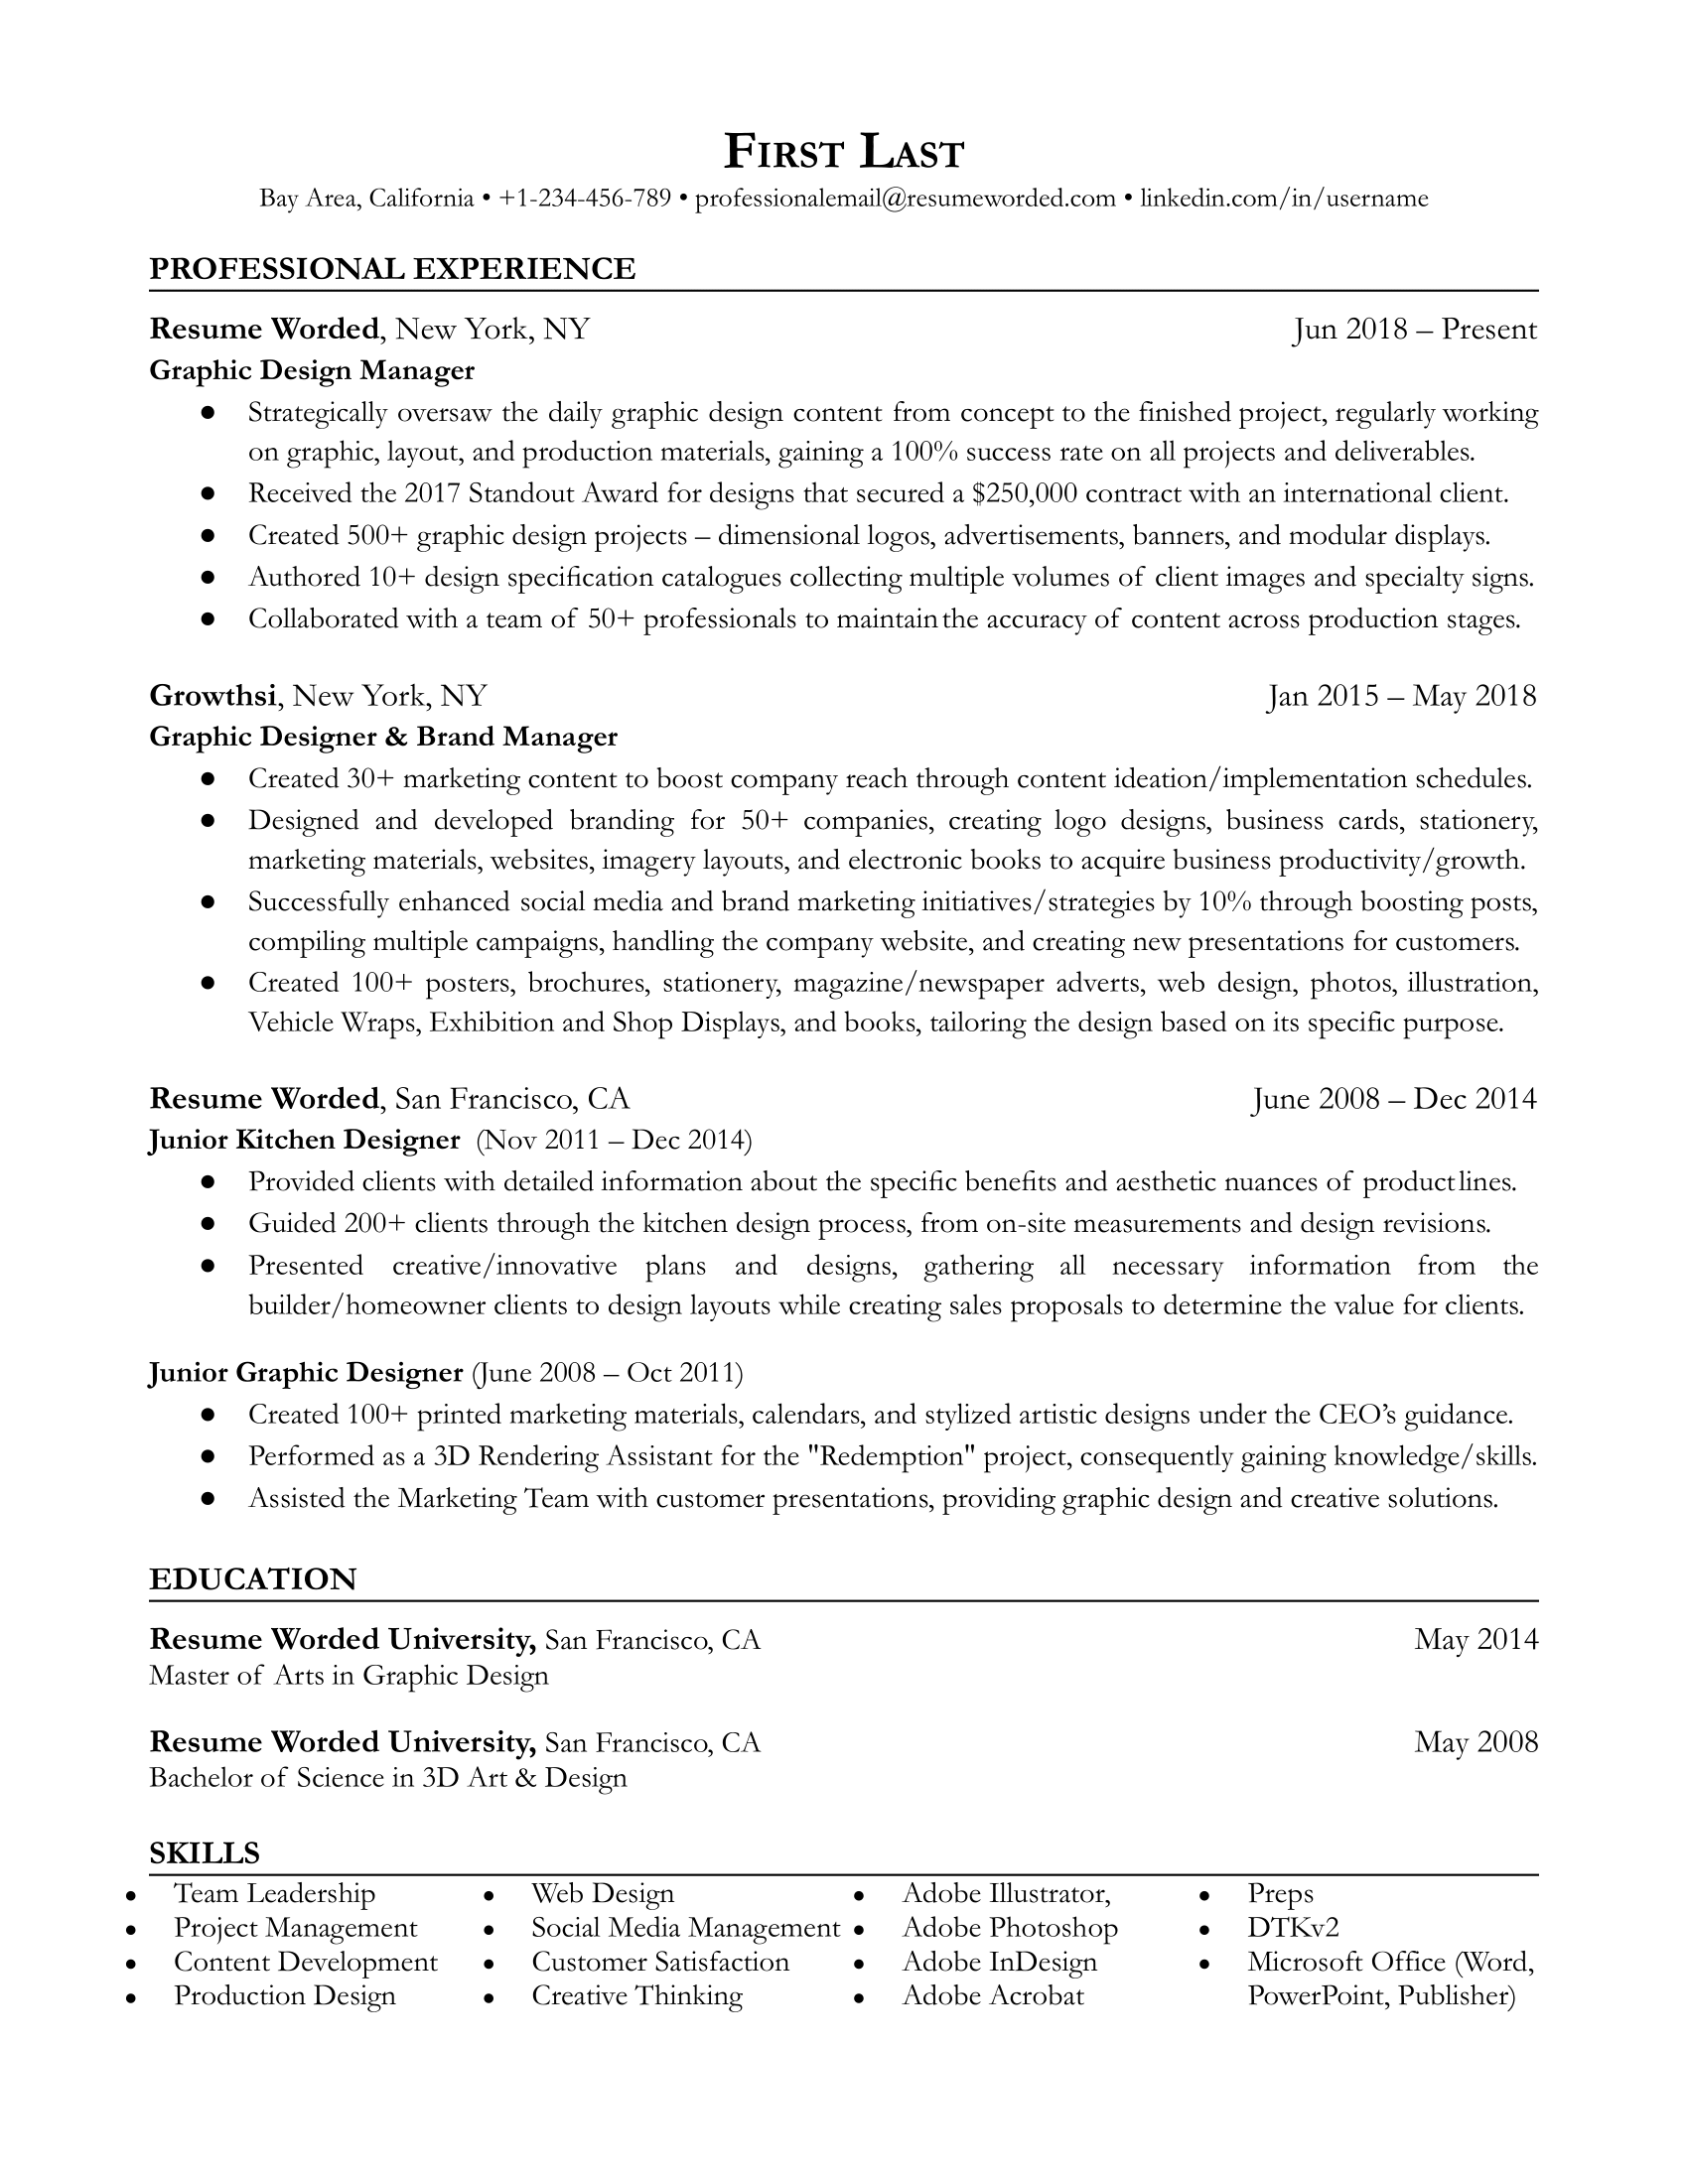 Graphic Design Manager Resume Template + Example